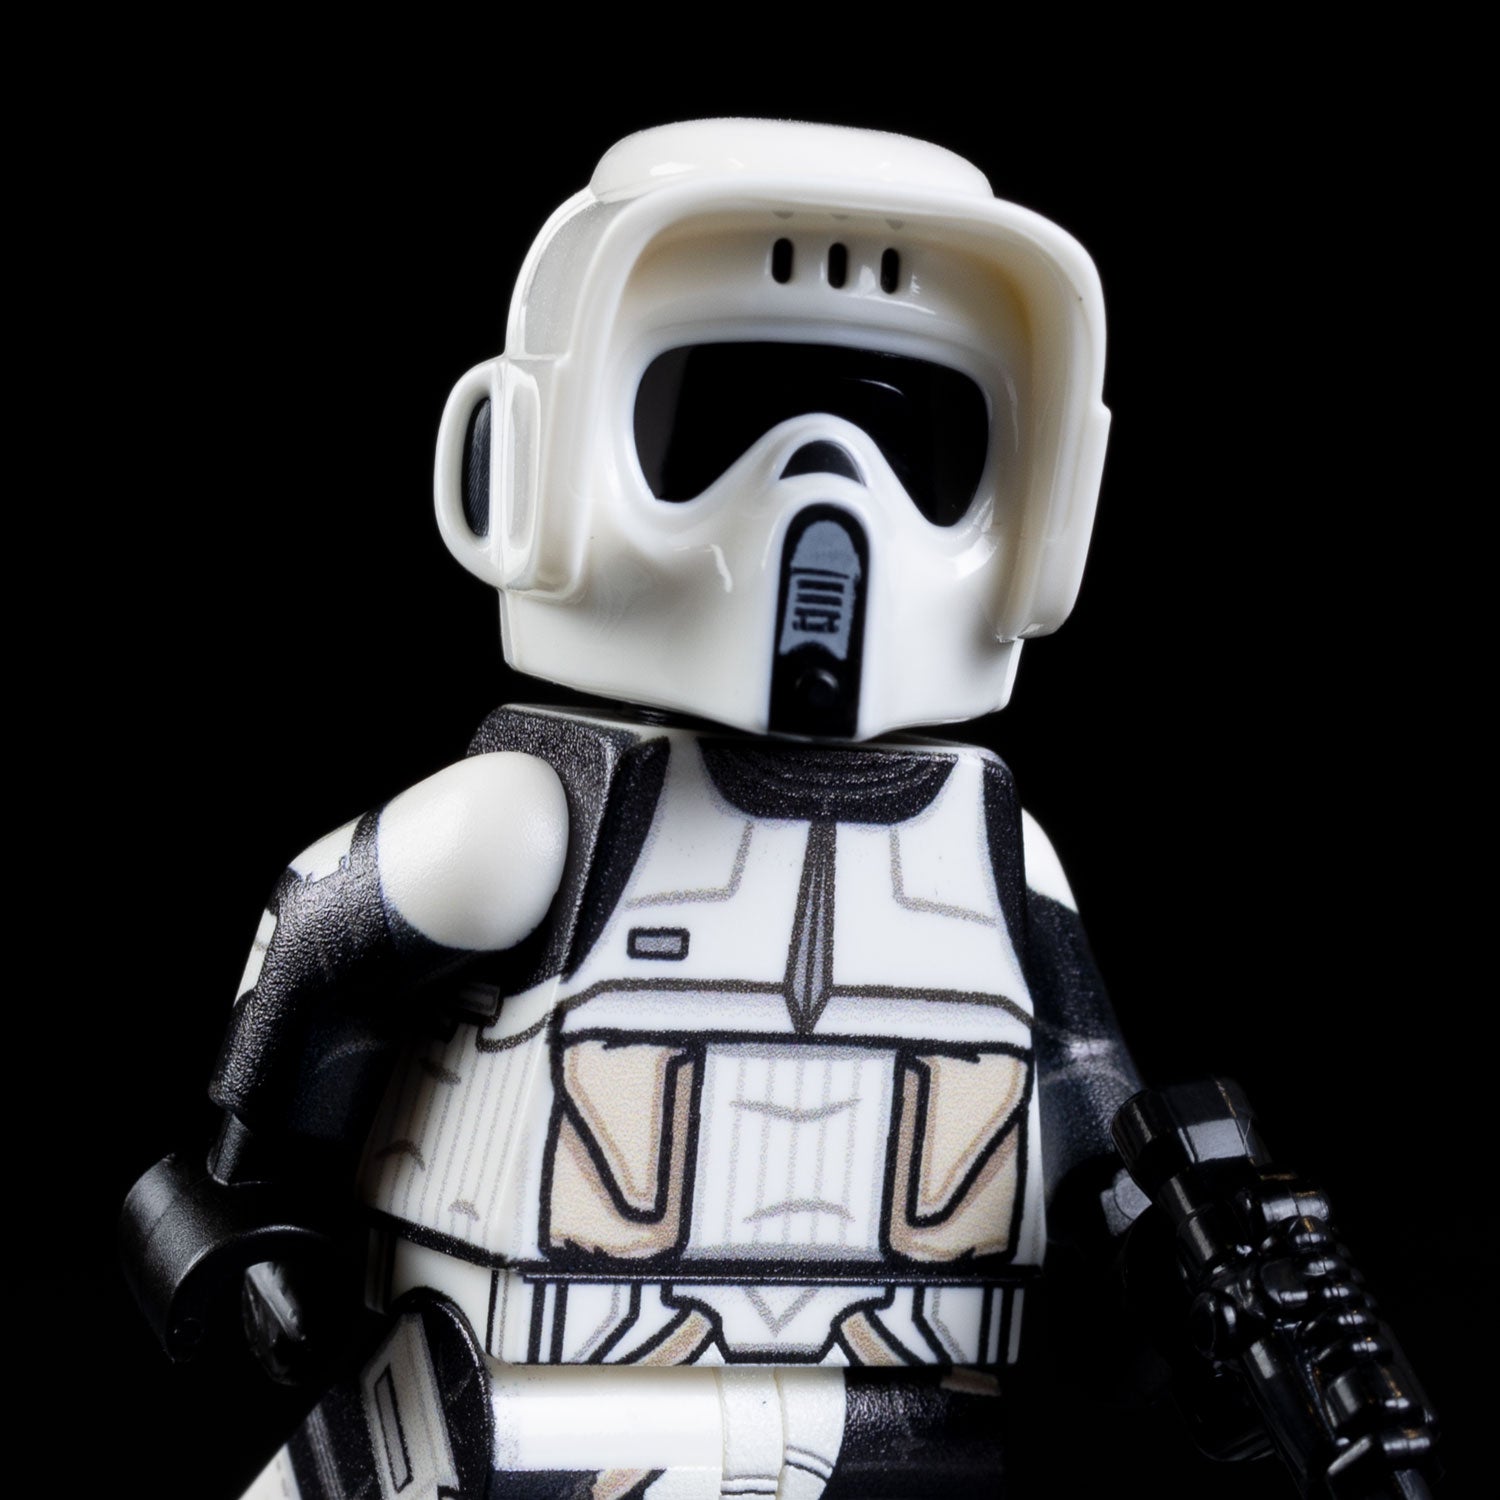 Scout Trooper - The Minifig Co.